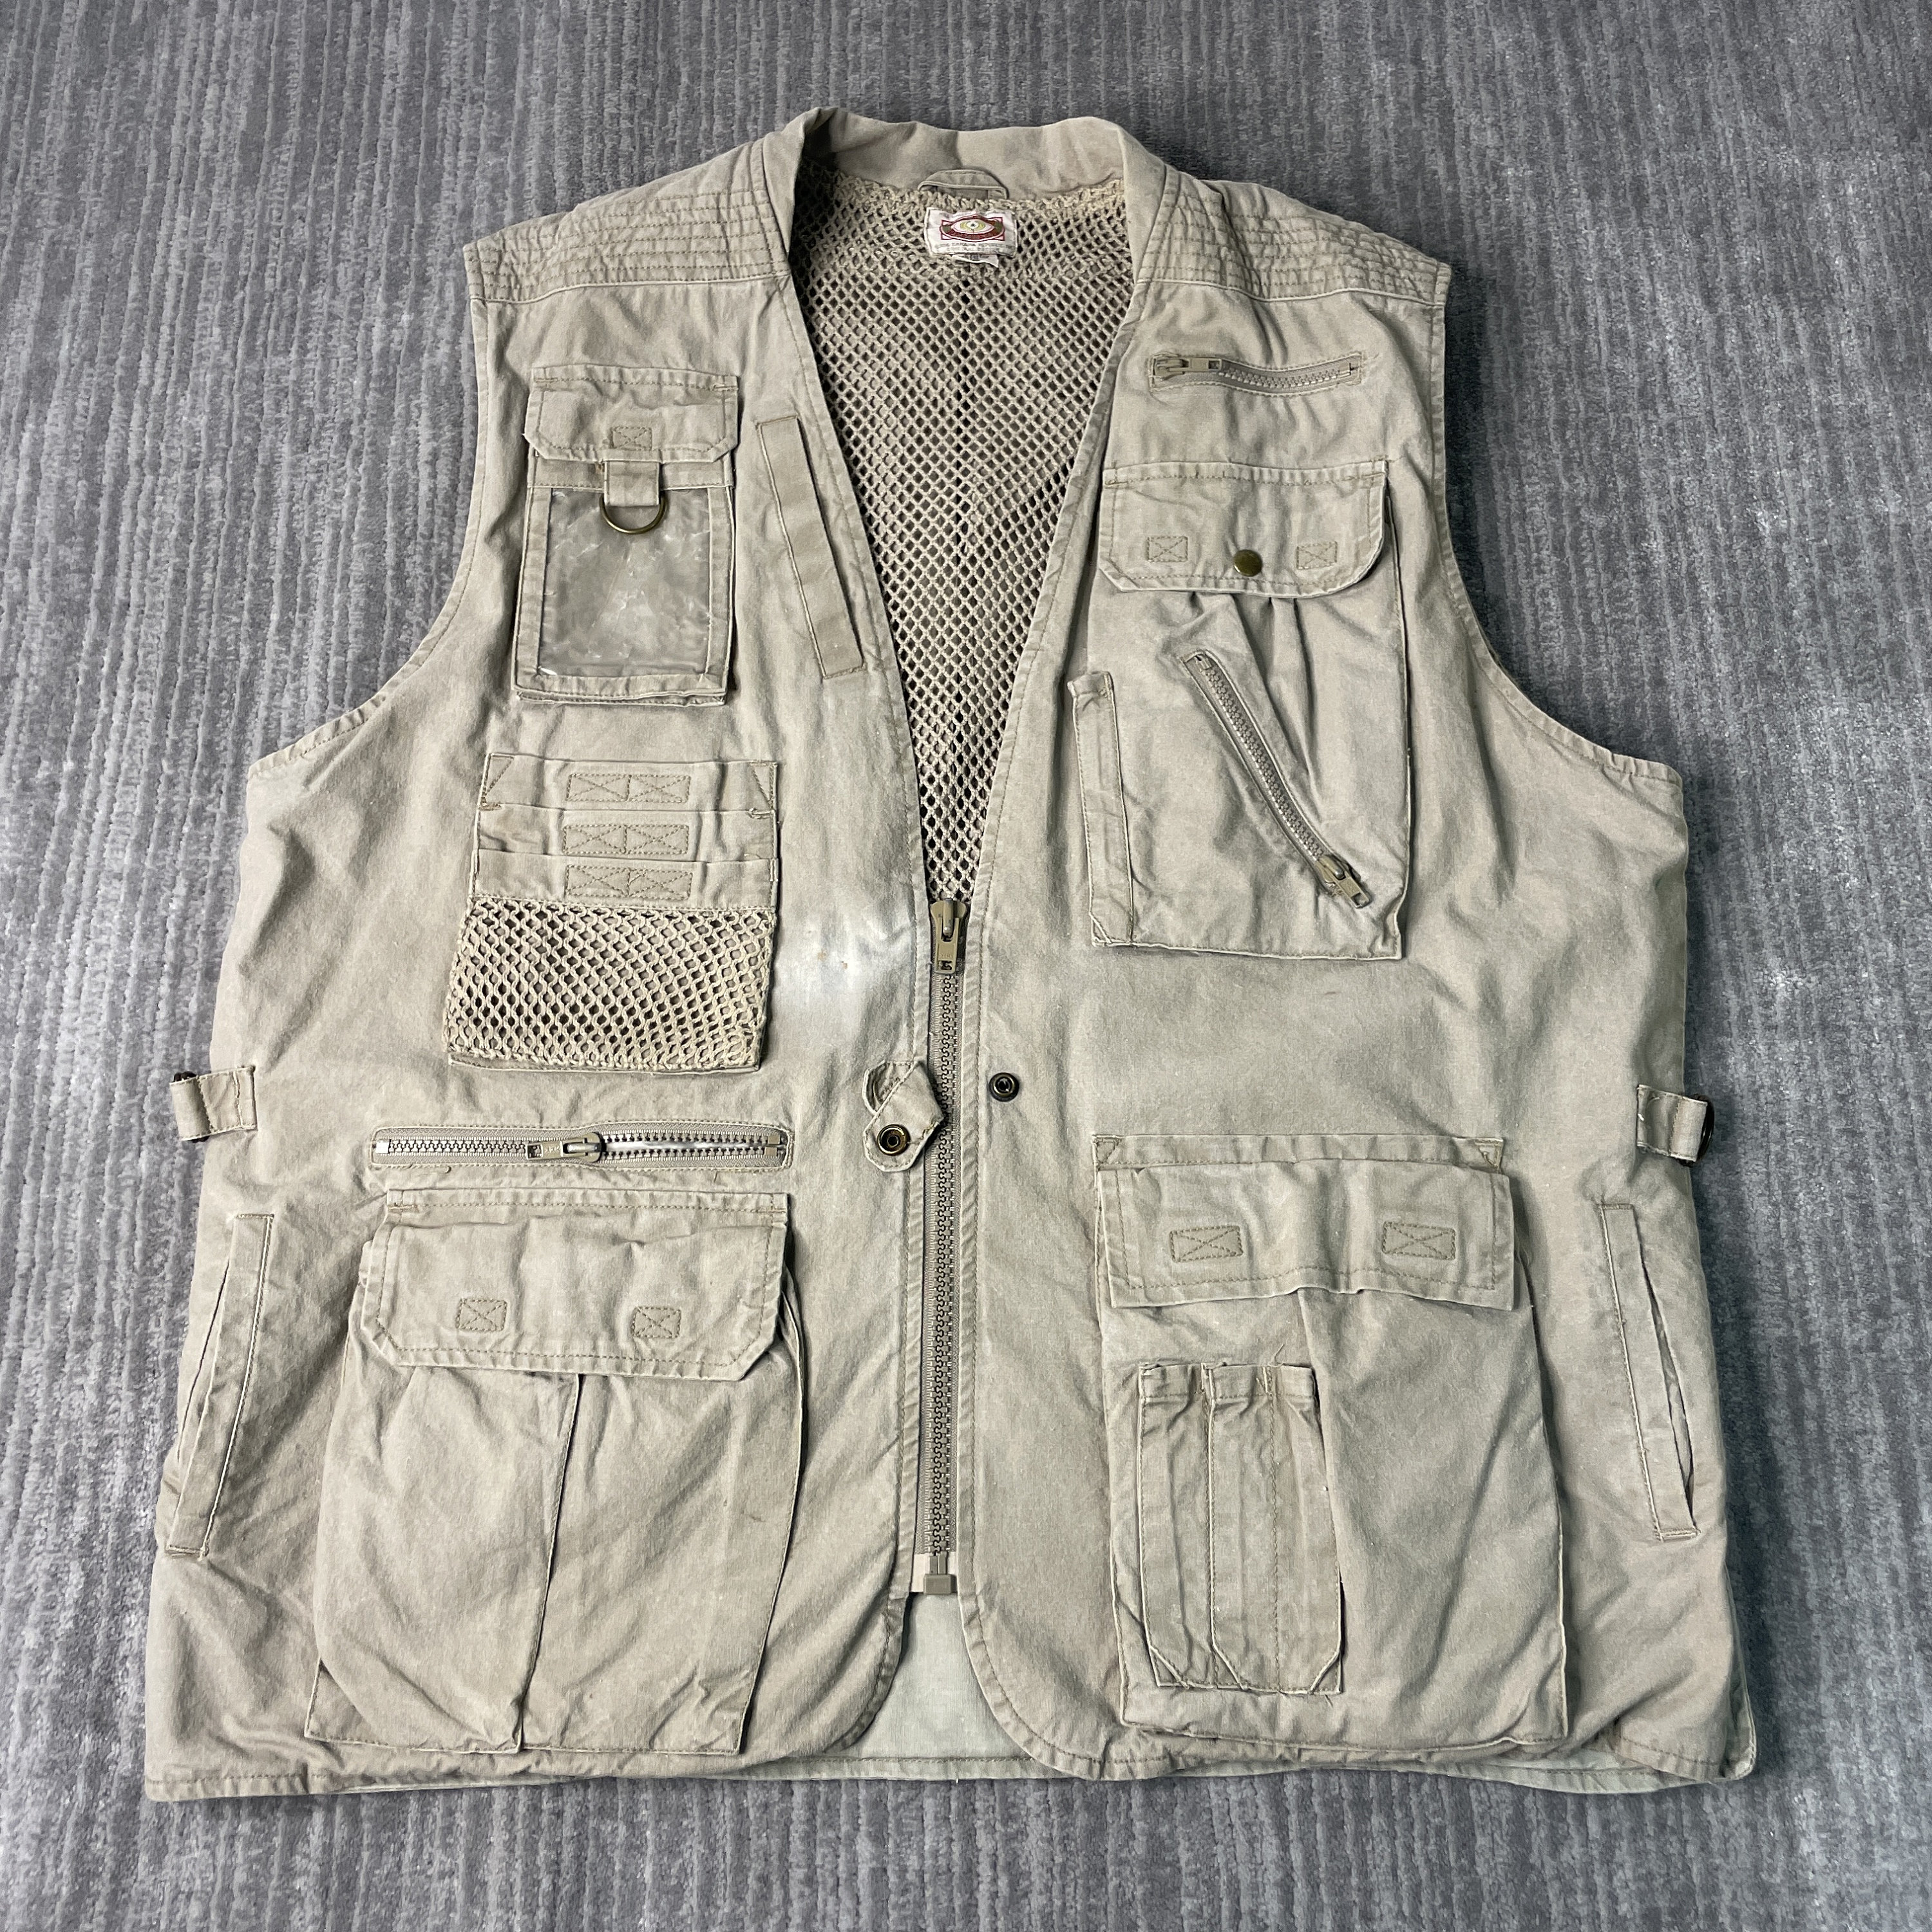 Vintage 90s Banana Republic Outdoors Casual Fishing Hunting Multi Purpose  1990s Fashion Beige Zip up Vest Extra Large Mens 